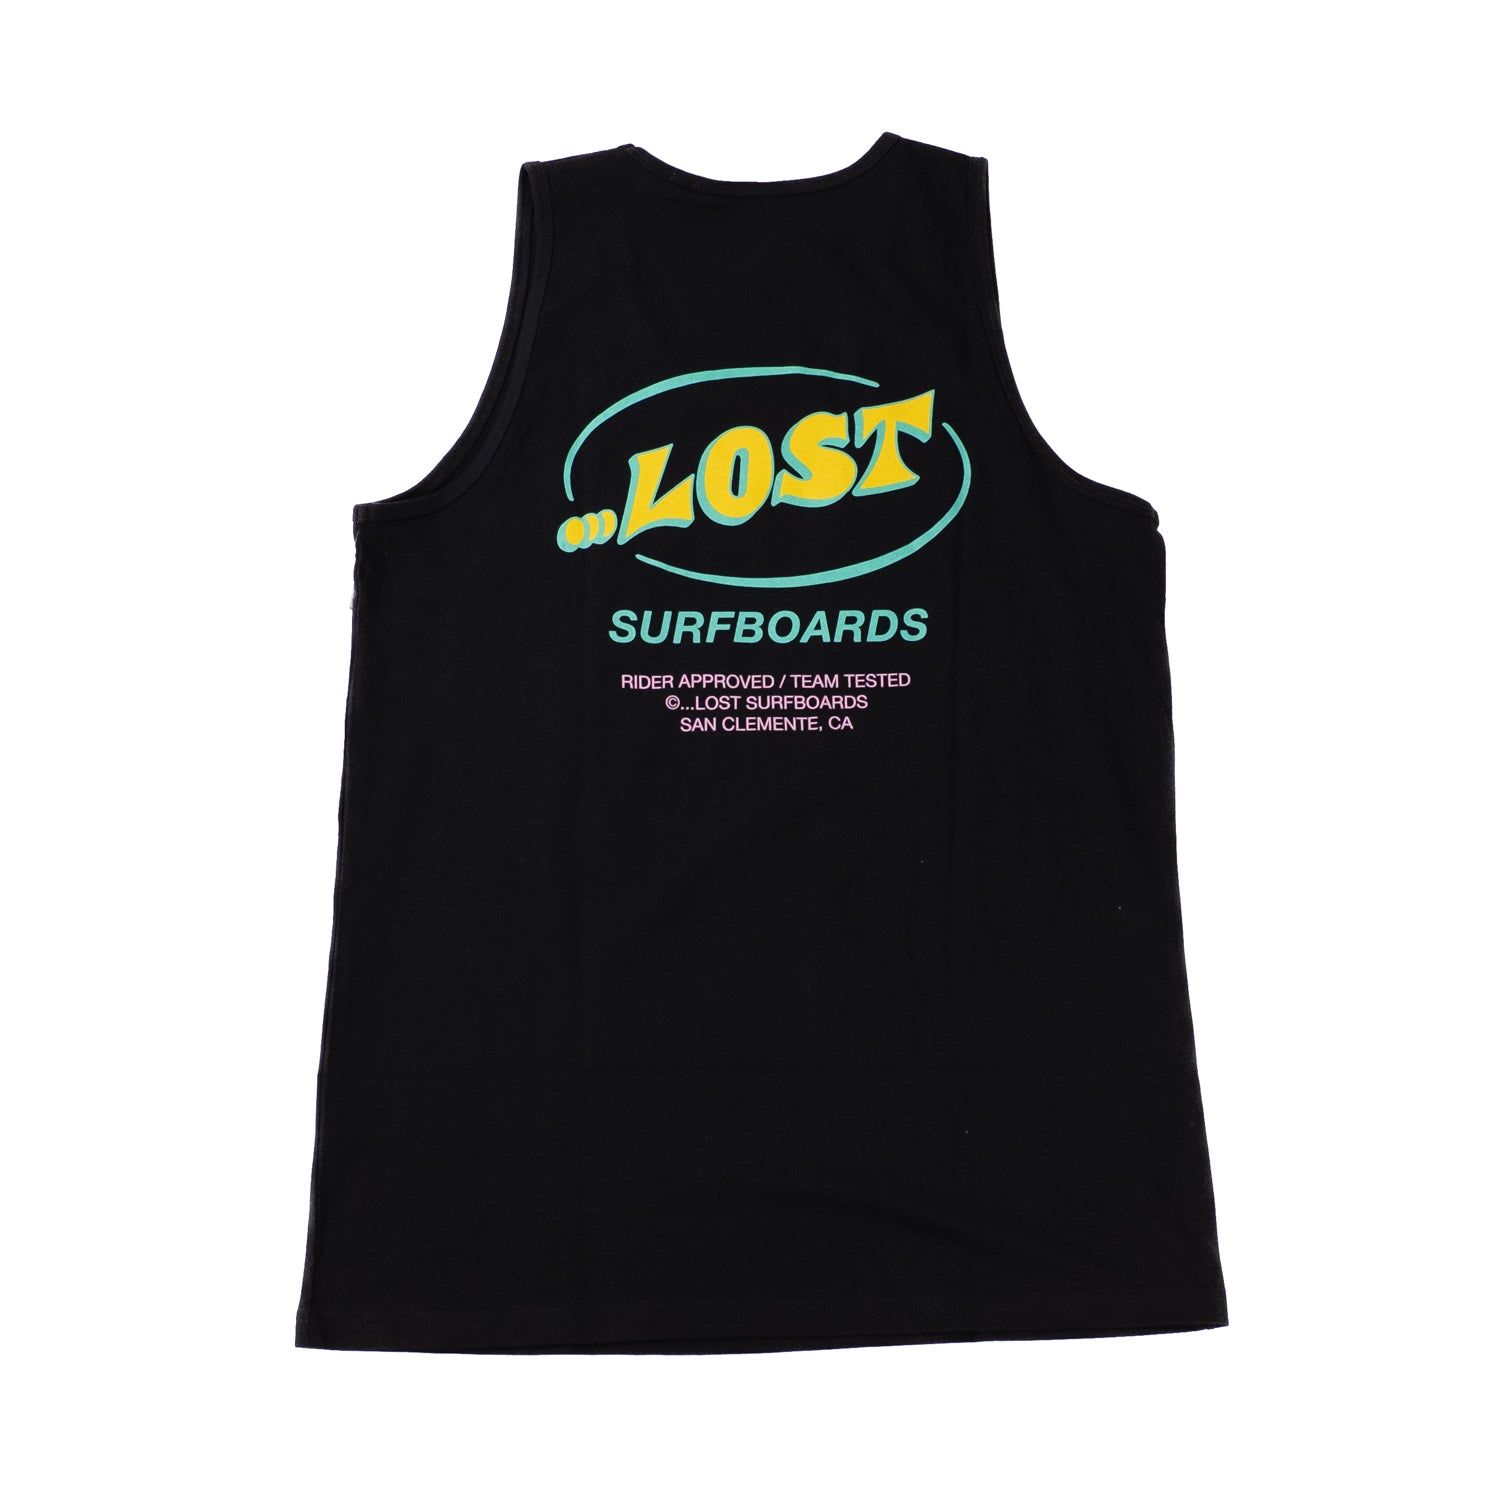 Approved Tank - Black